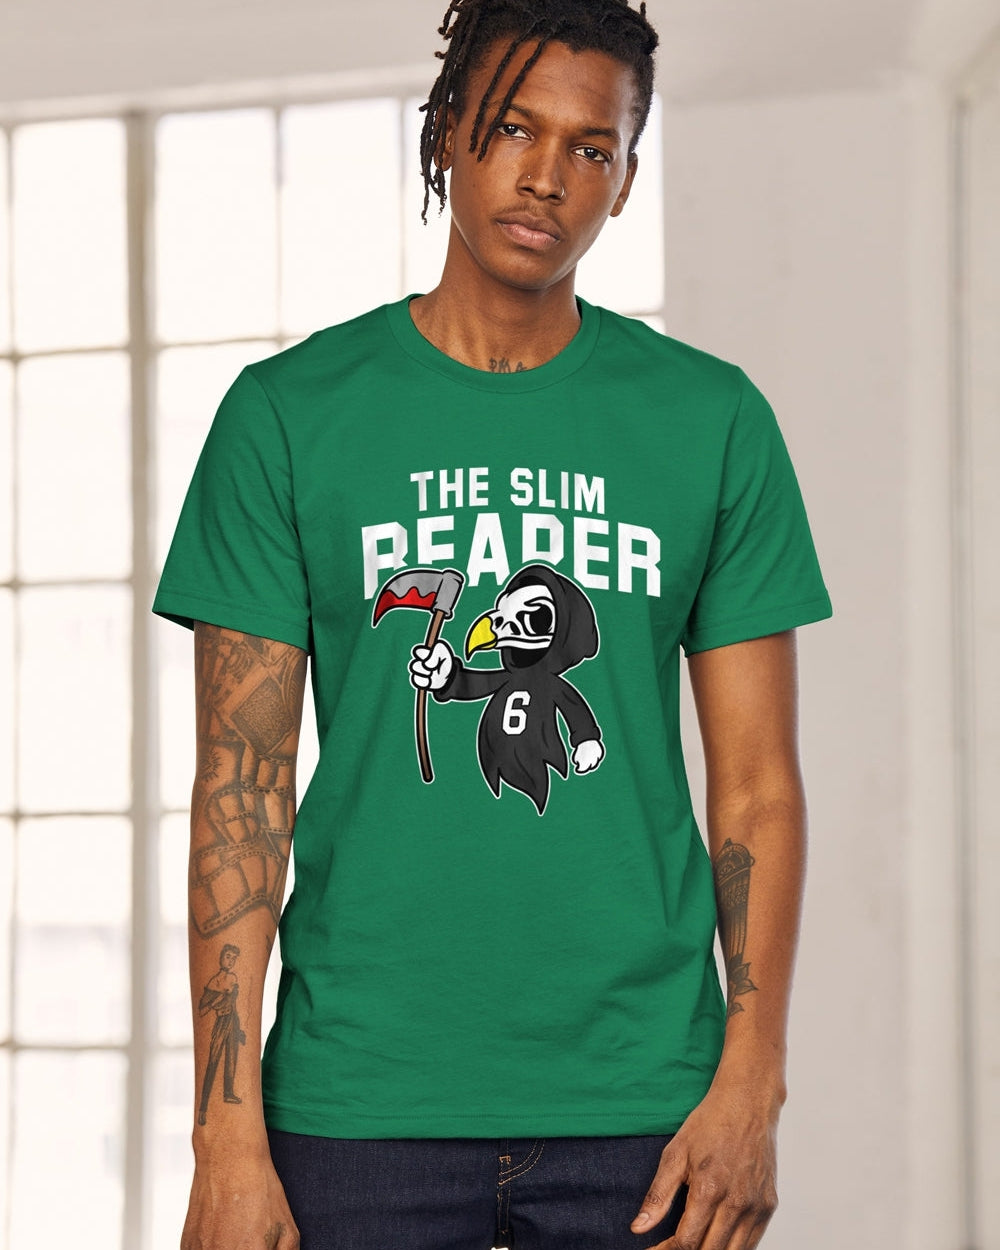 Philly Eagles T-Shirts for Sale